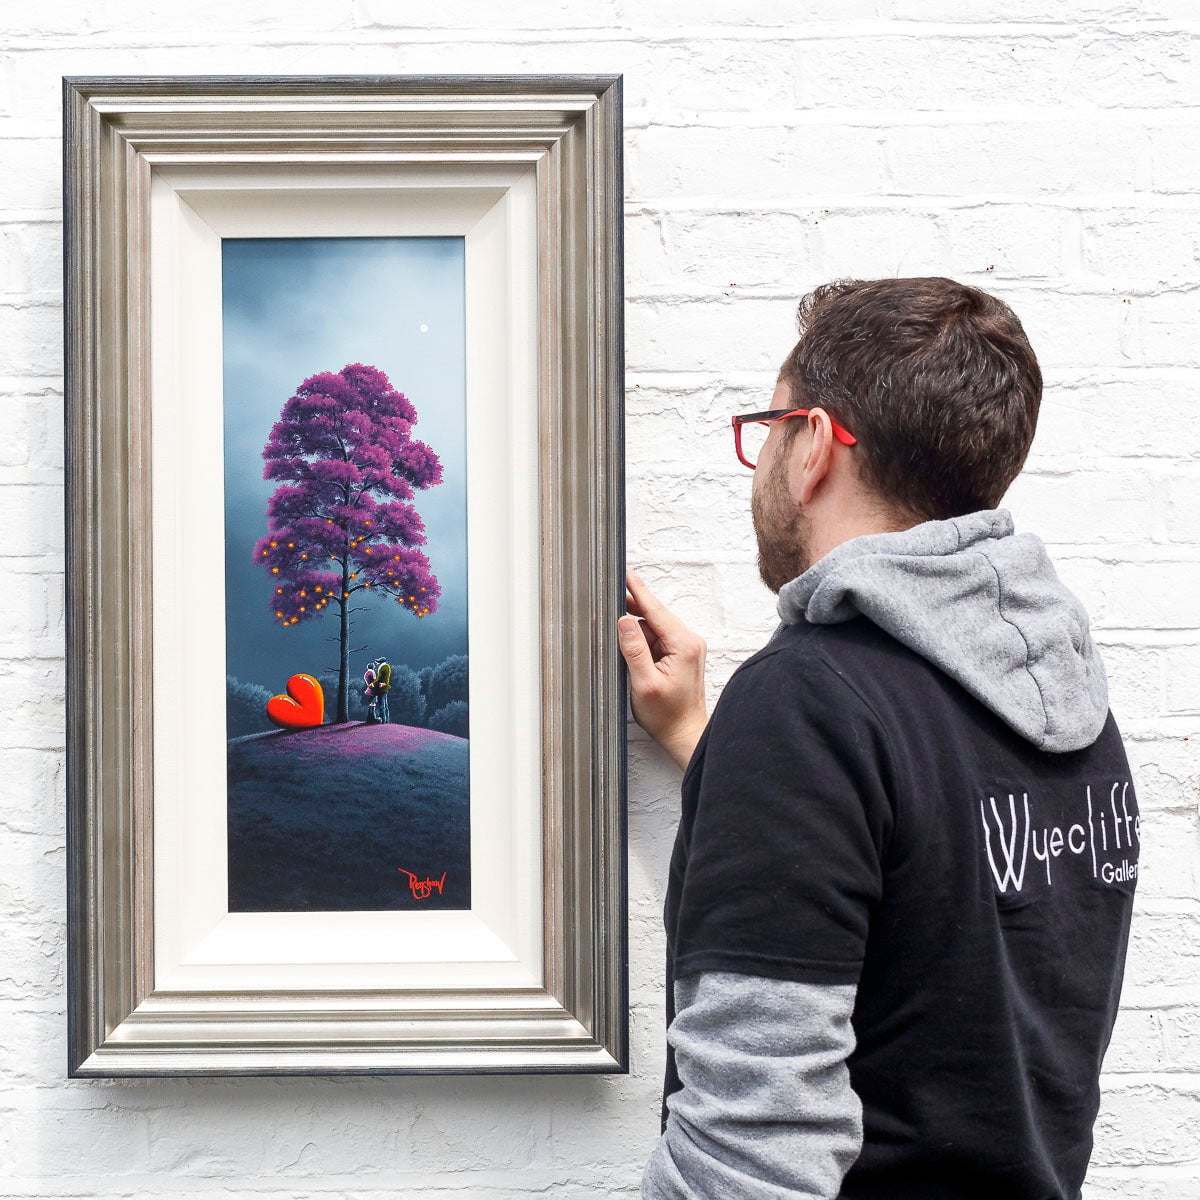 You Bring Colour To My World &amp; You Bring Colour To My Life - Matching Original SET David Renshaw Matching Original SET